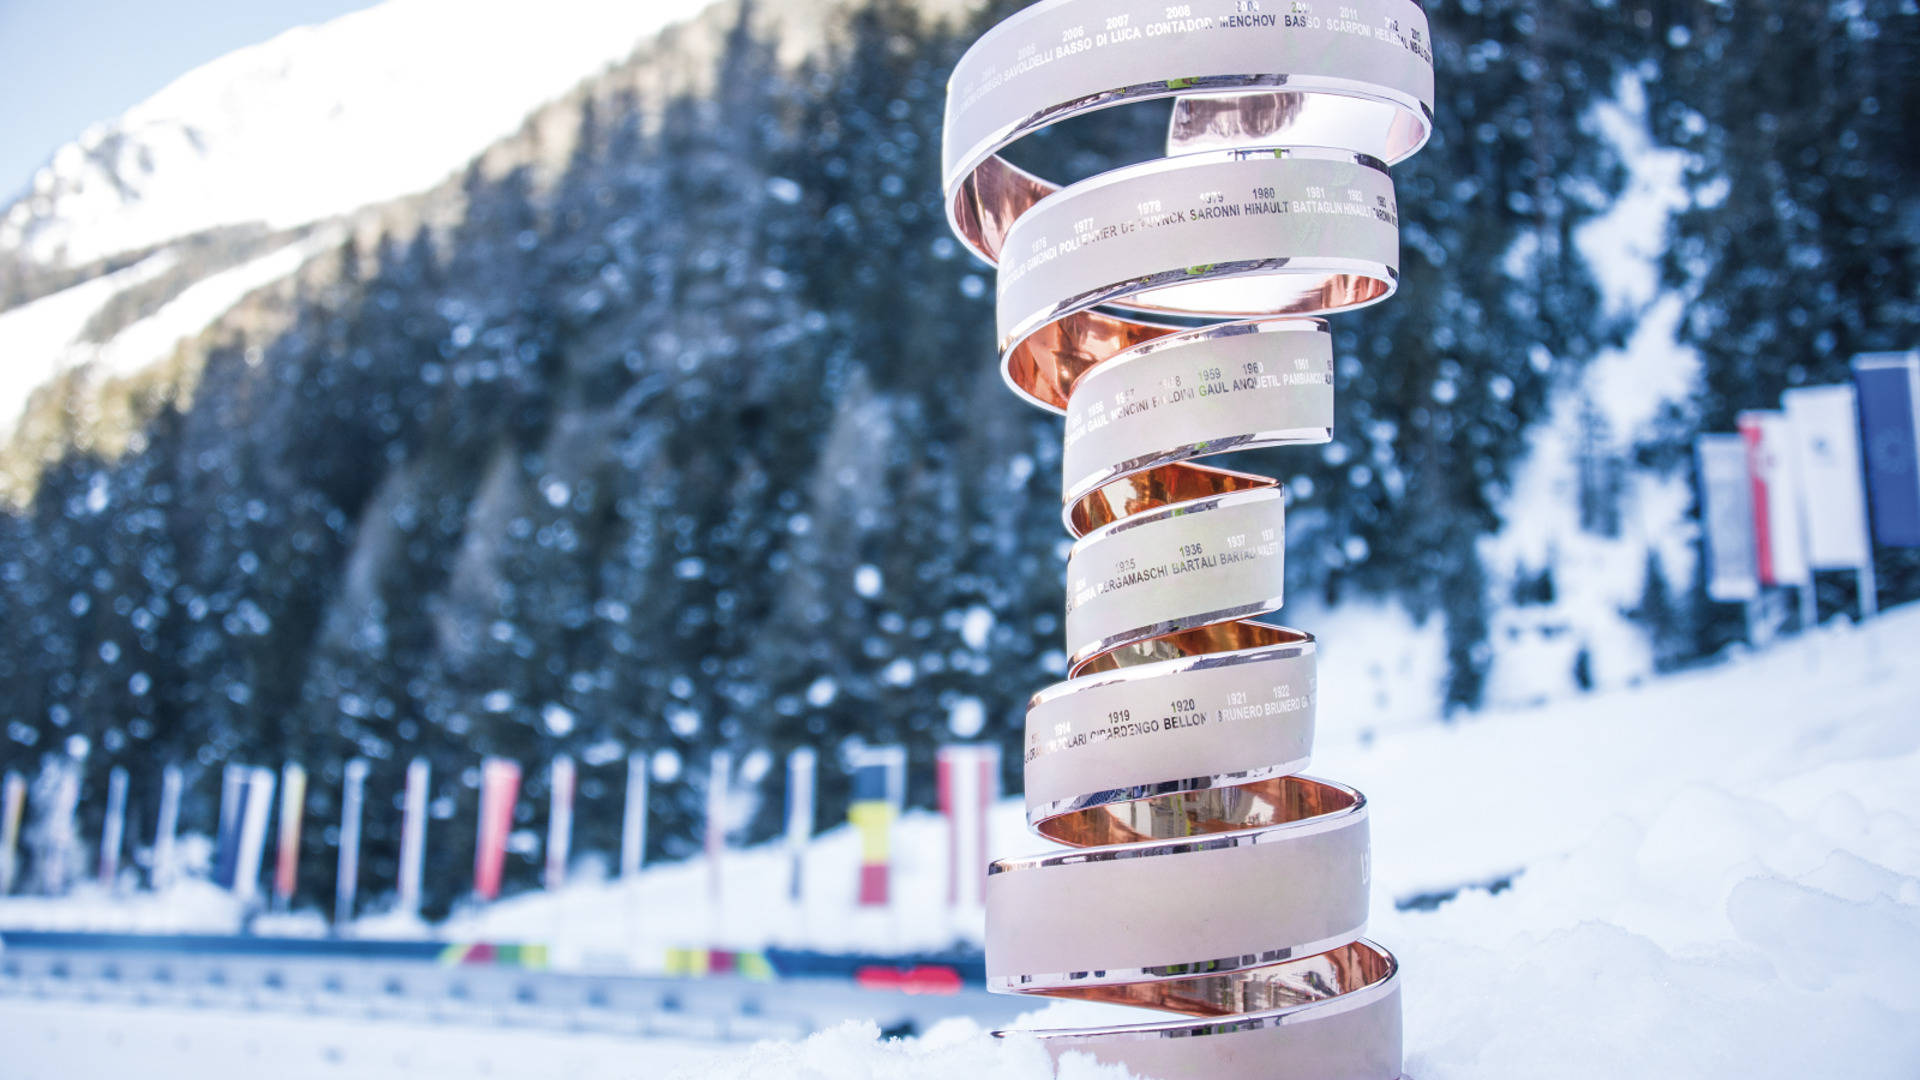 24.01.2019 - The "Trofeo Senza Fine" comes to Antholz